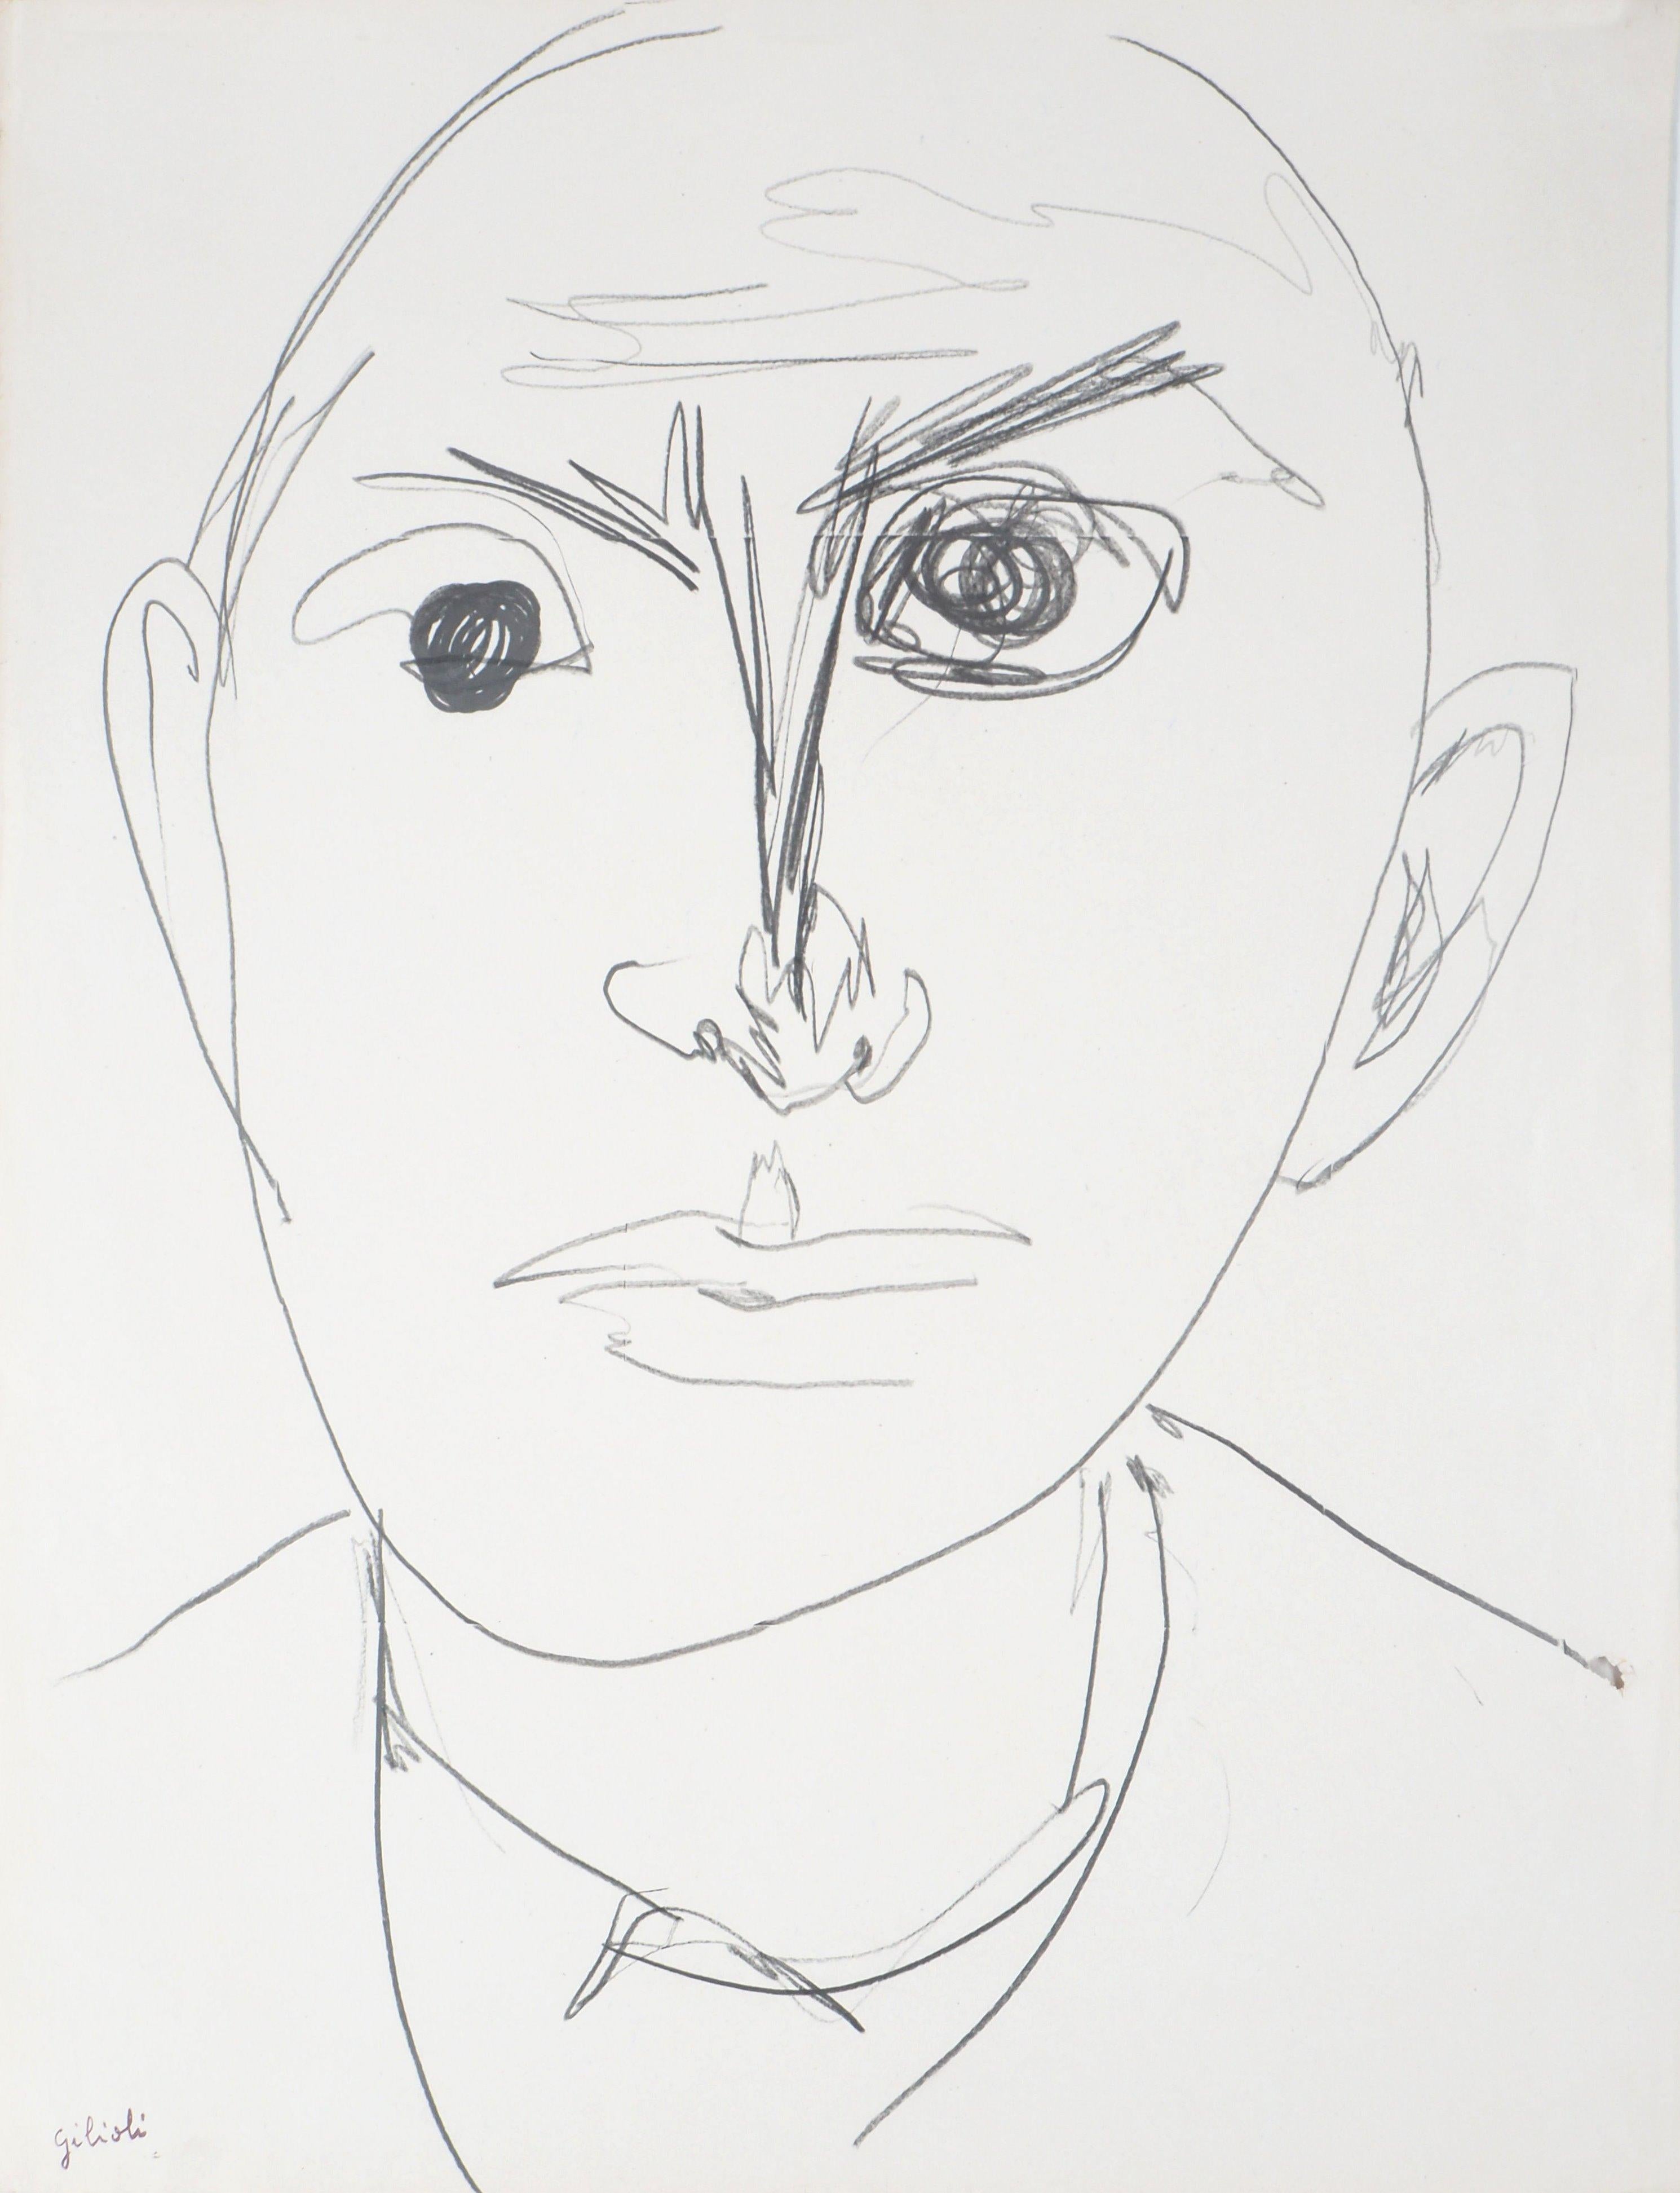 Male Face - Handsigned drawing